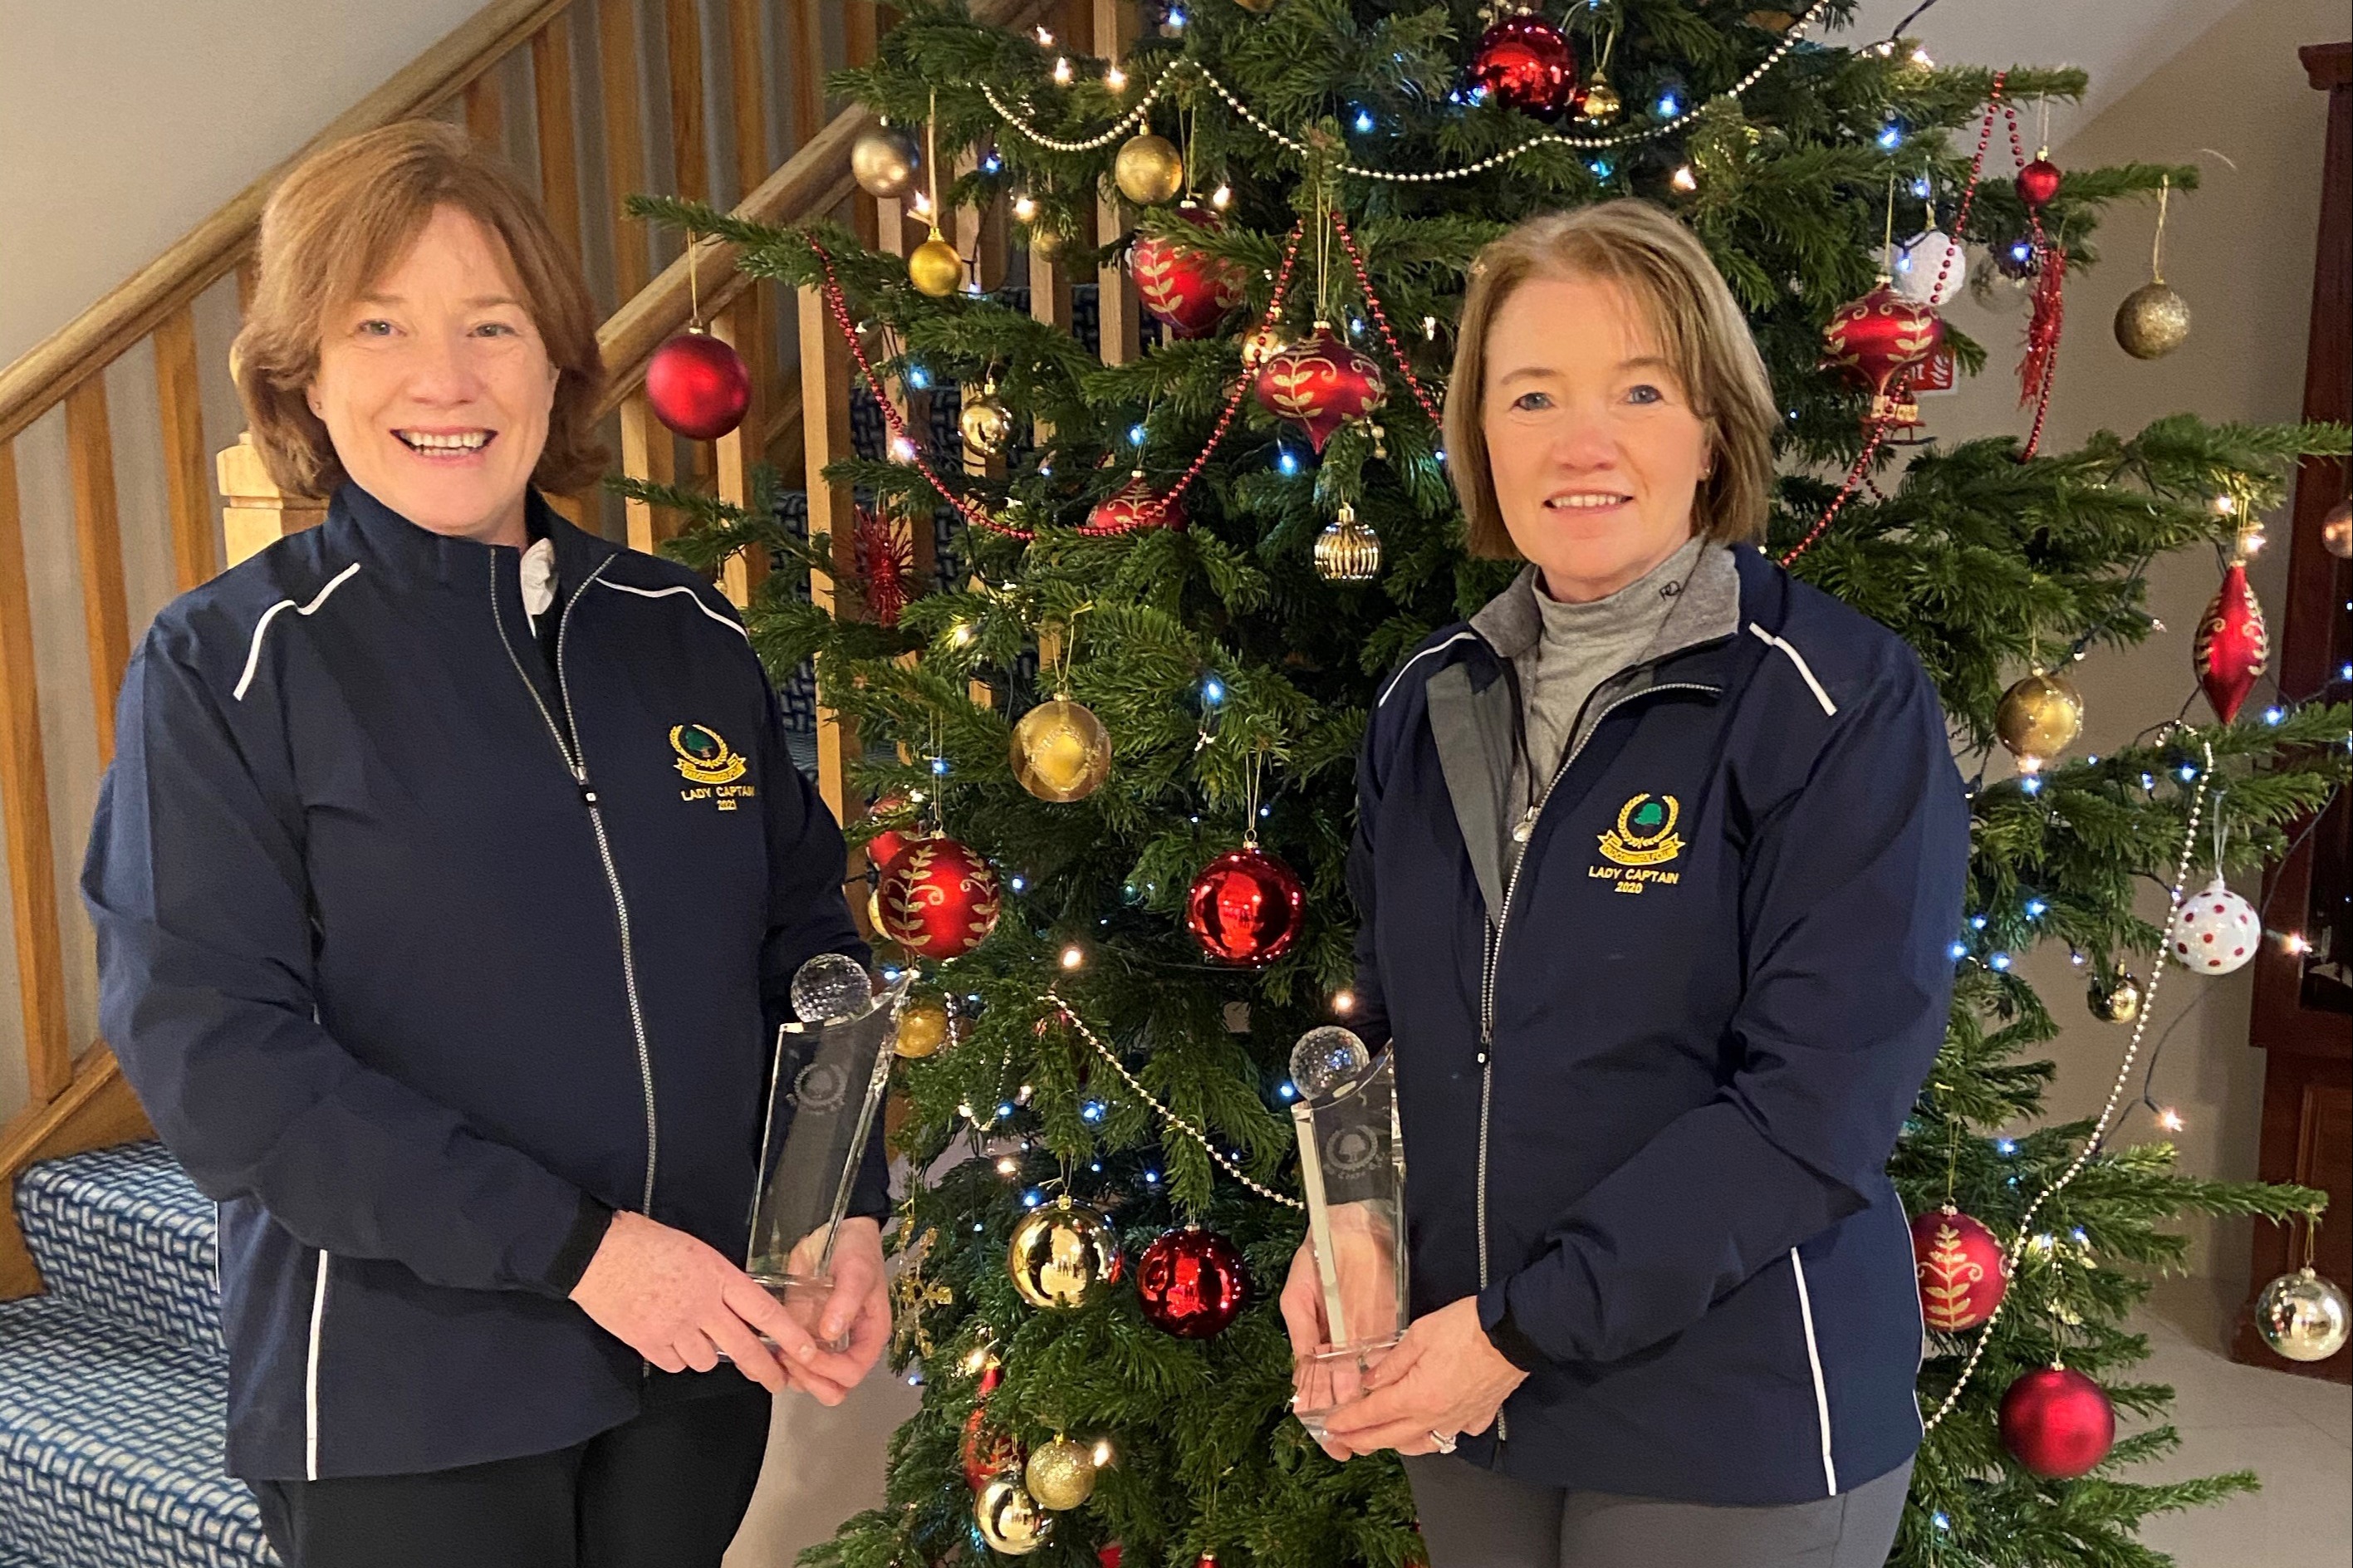 2020 Winners of the 4 Ball Match Play: Lady Captain Laura O’Kiersey & Alison Eggers 